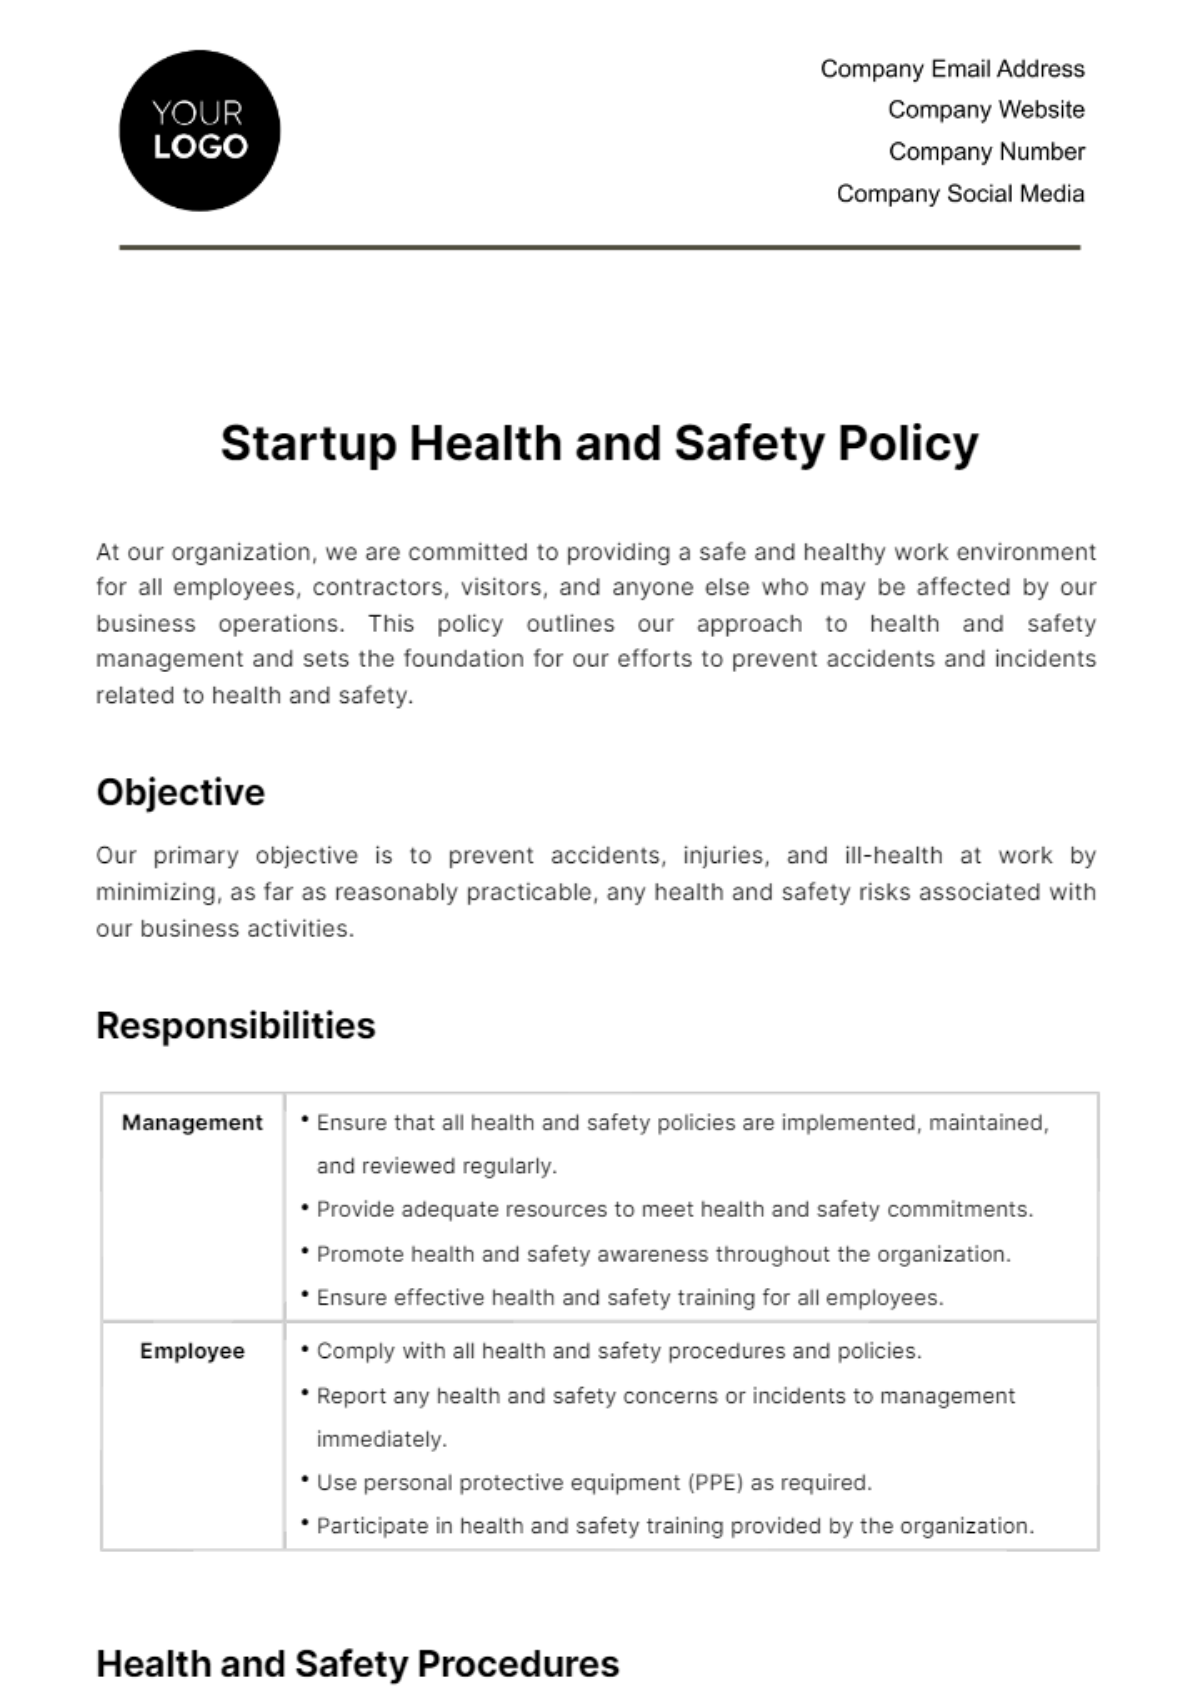 Startup Health and Safety Policy Template